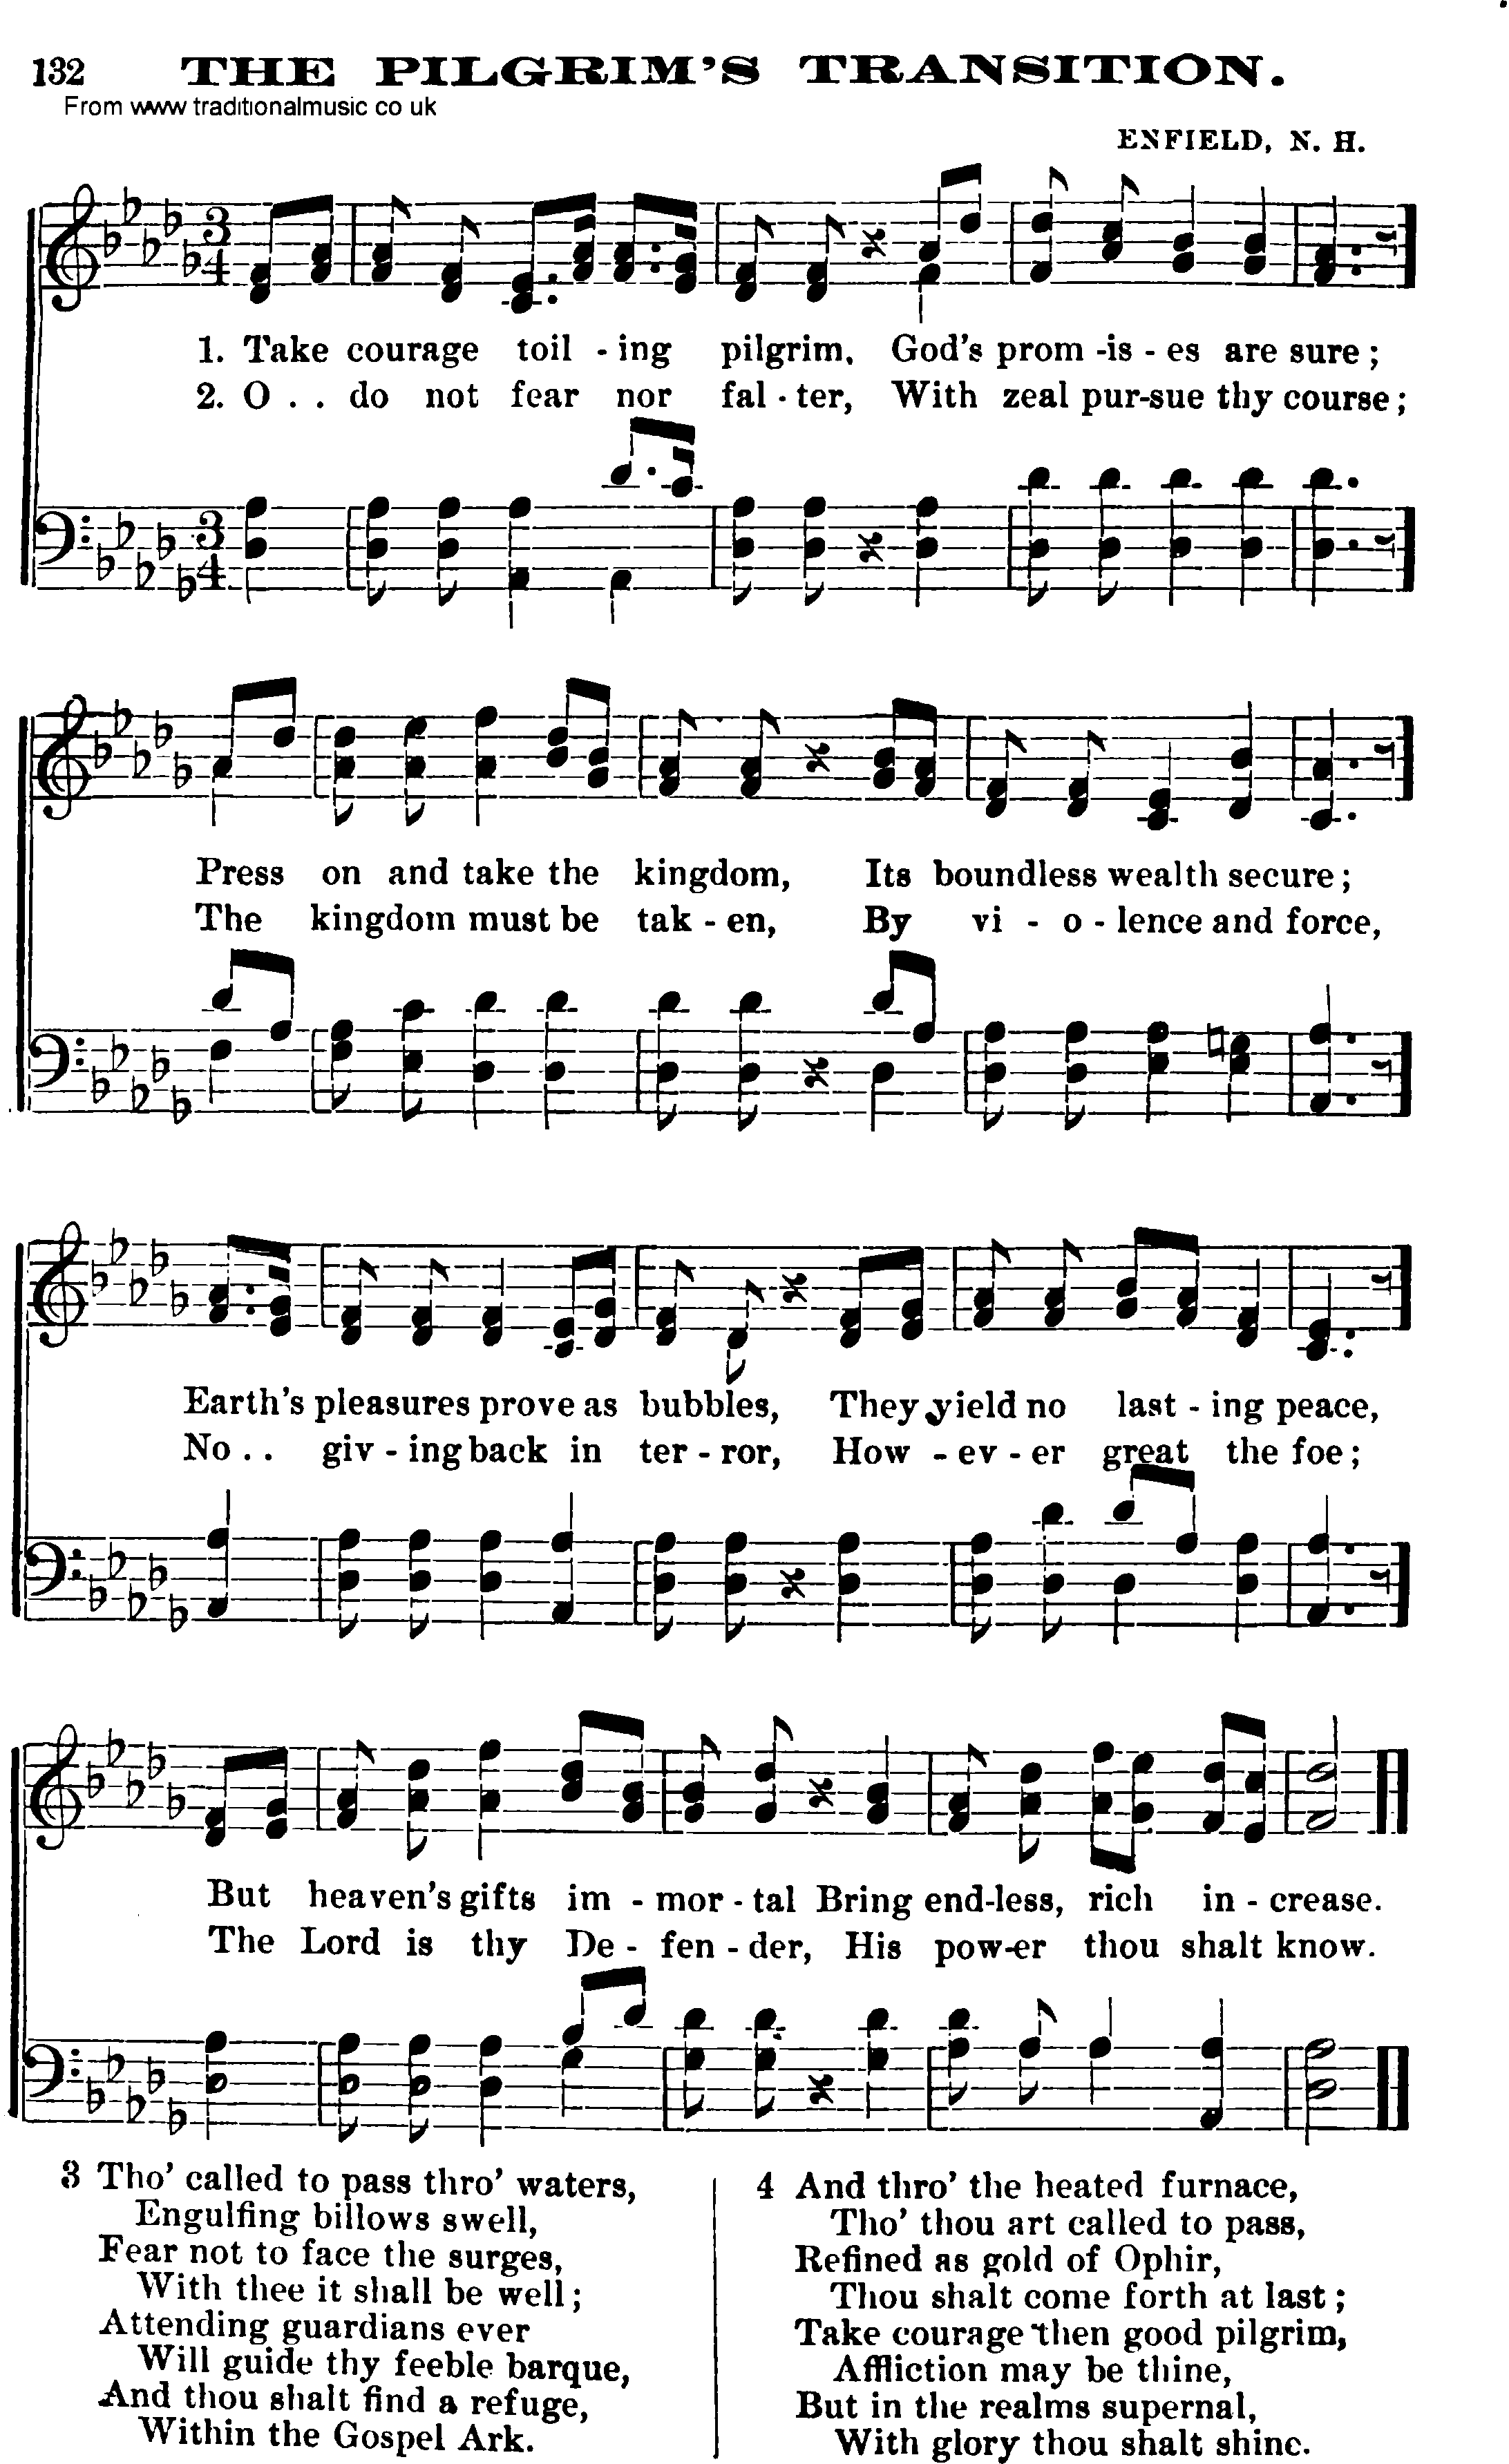 Shaker Music collection, Hymn: Th Pilgrims Transition, sheetmusic and PDF